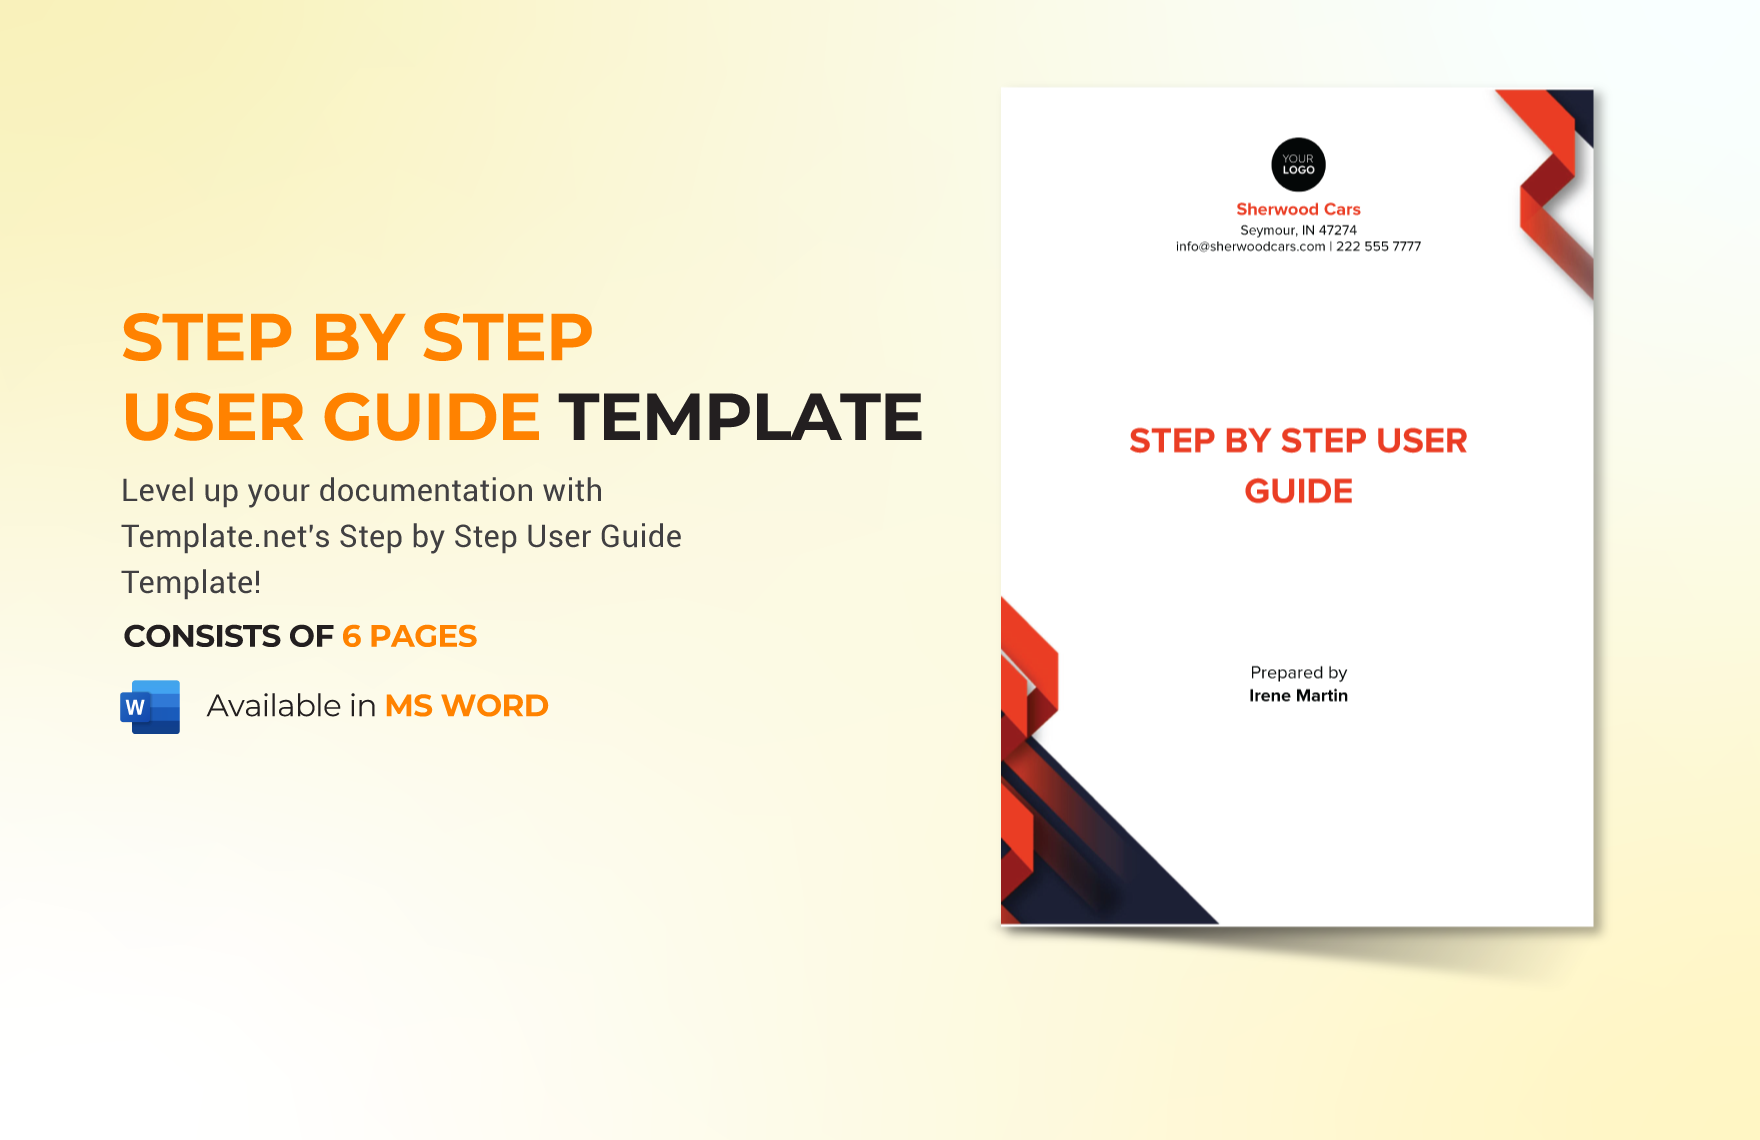 Step by Step User Guide Template